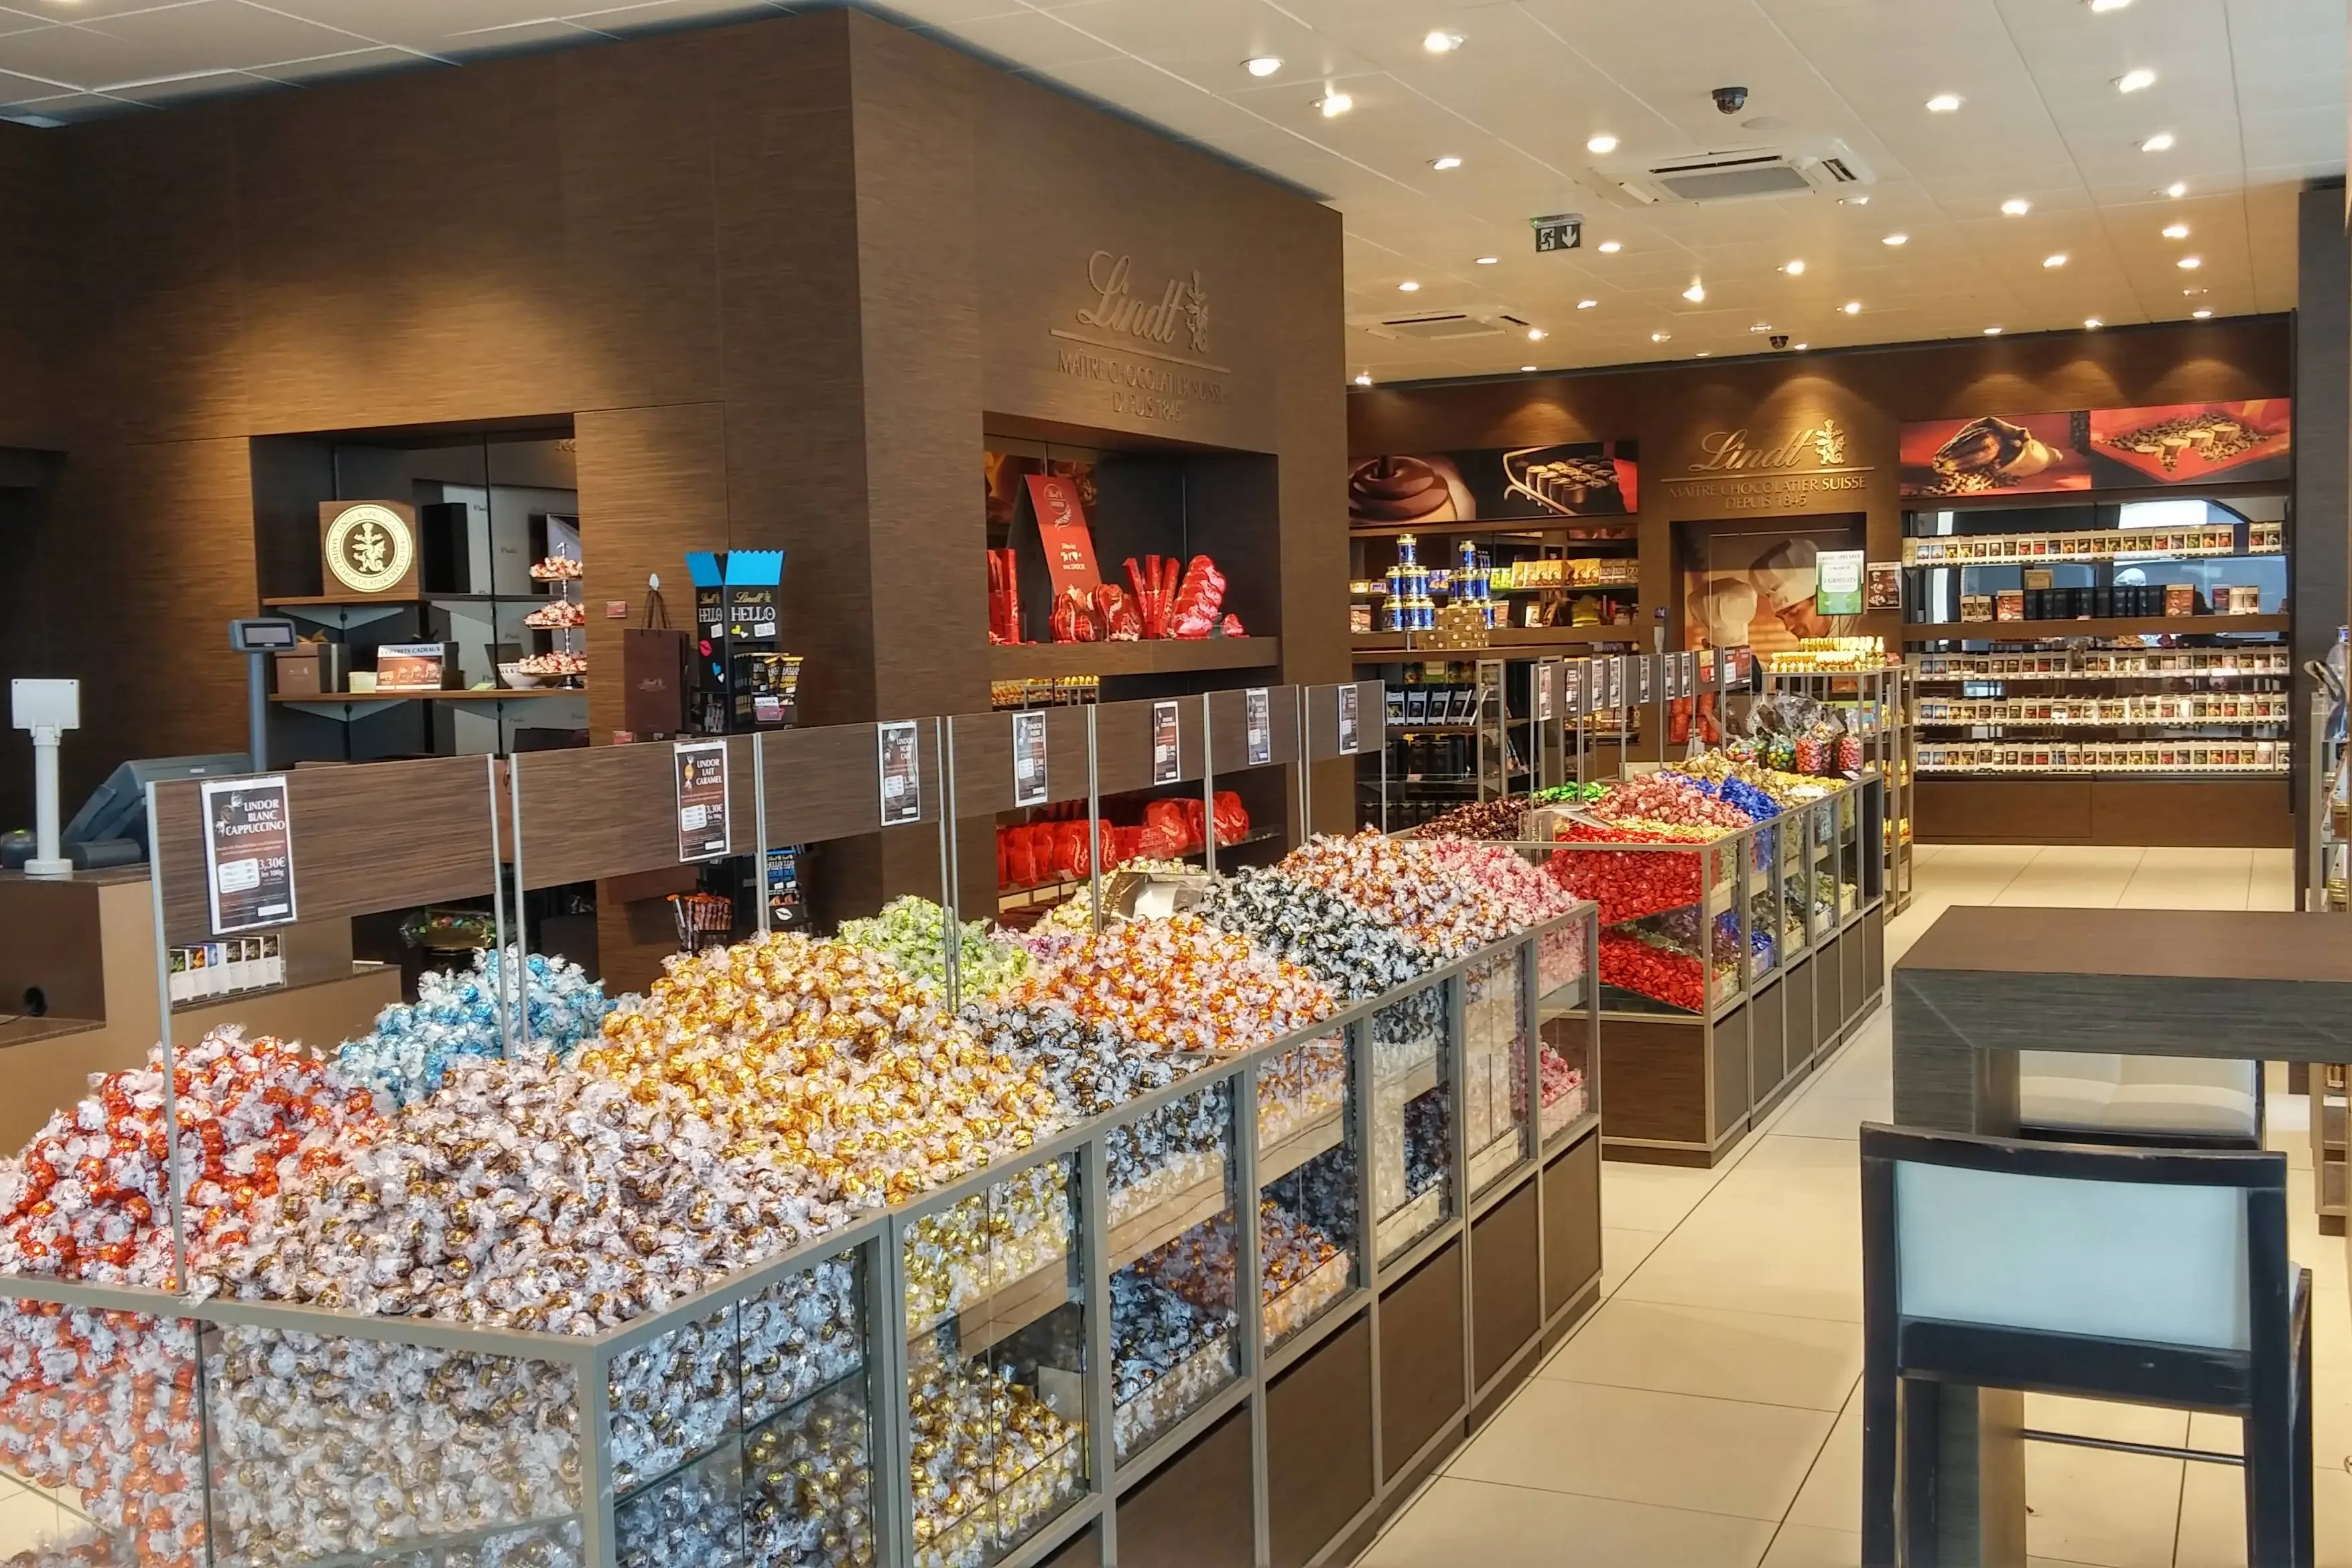 Lindt in Brazil, south_america | Sweets - Country Helper